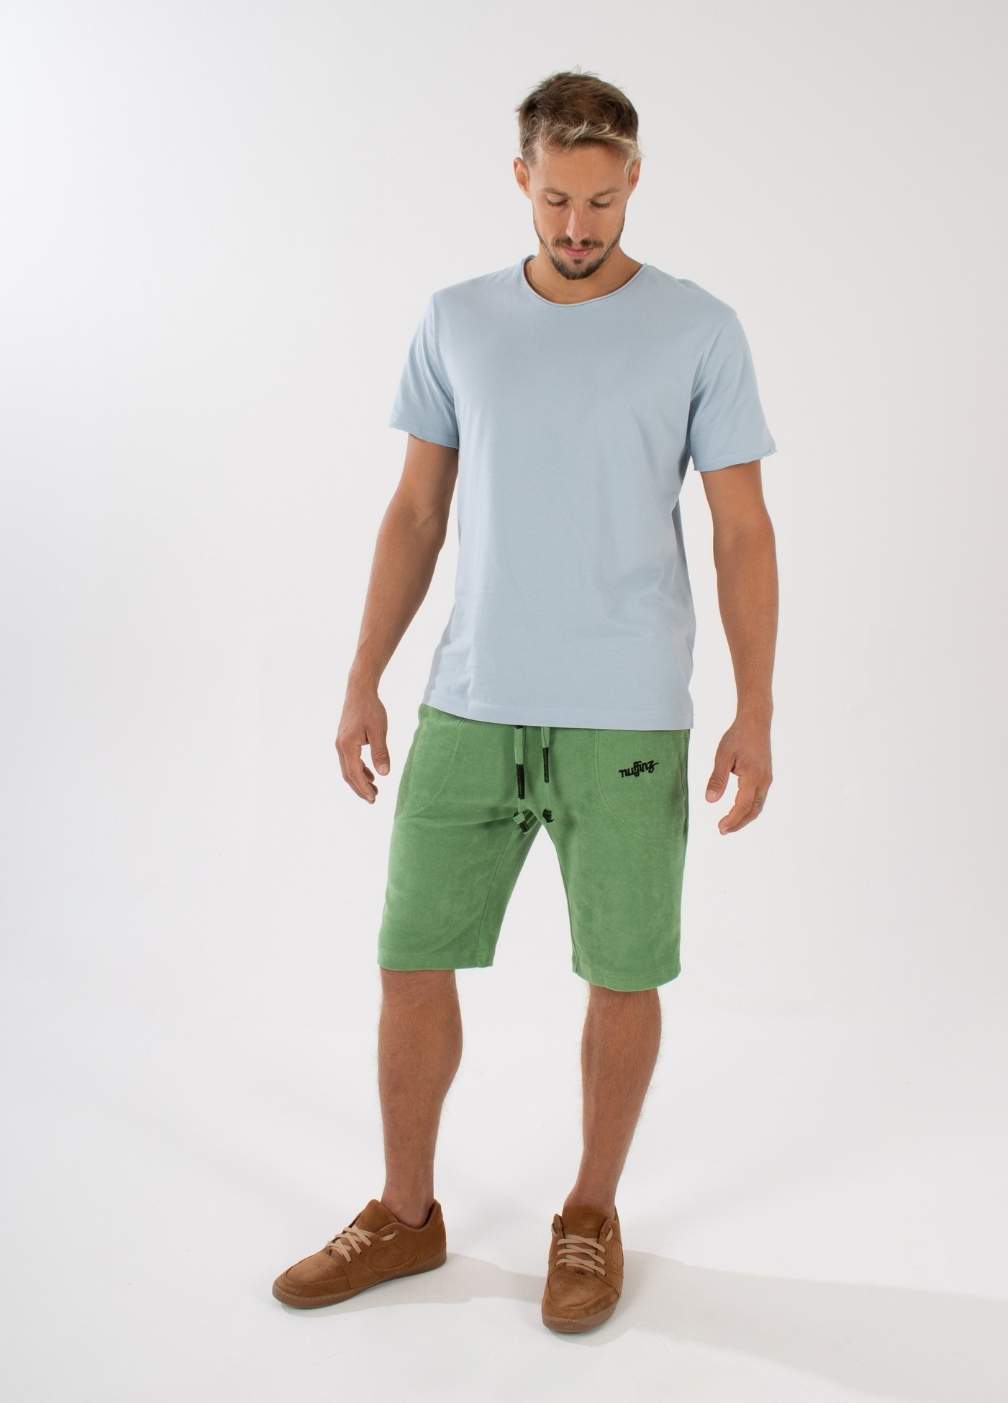 nuffinz STONE GREEN TOWEL SHORTS - whole outfit visible from the front - made out of organic terry cloth - sustainable men's shorts - green unicolor